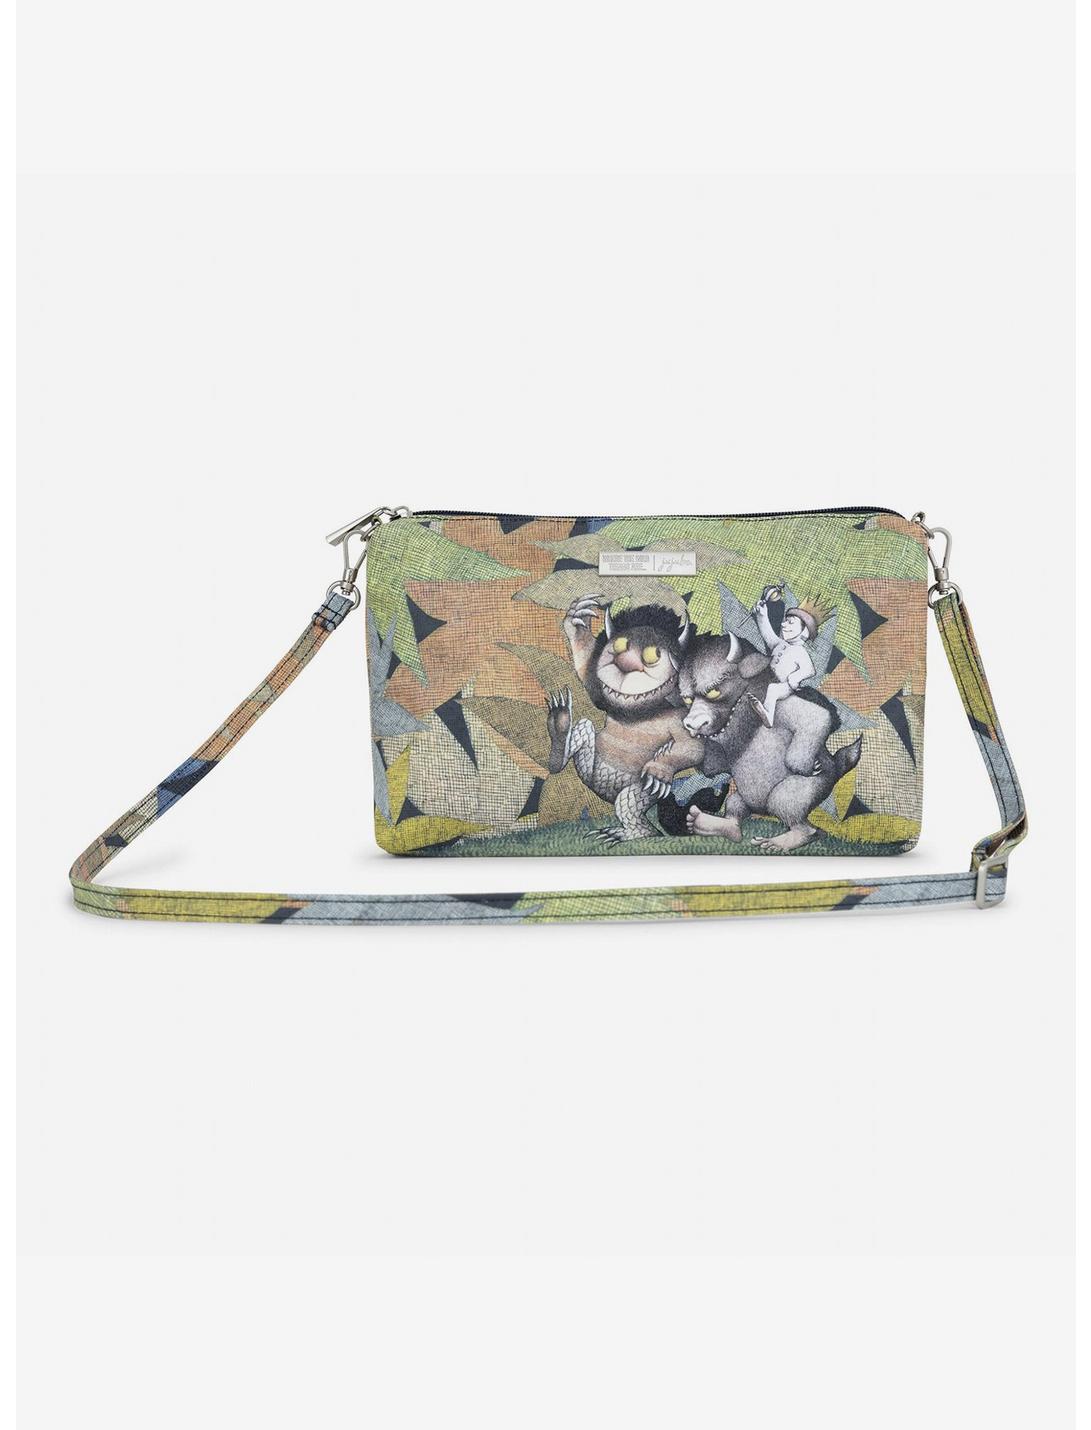 JuJuBe Where the Wild Things Are Be Quick Crossbody Bag, , hi-res